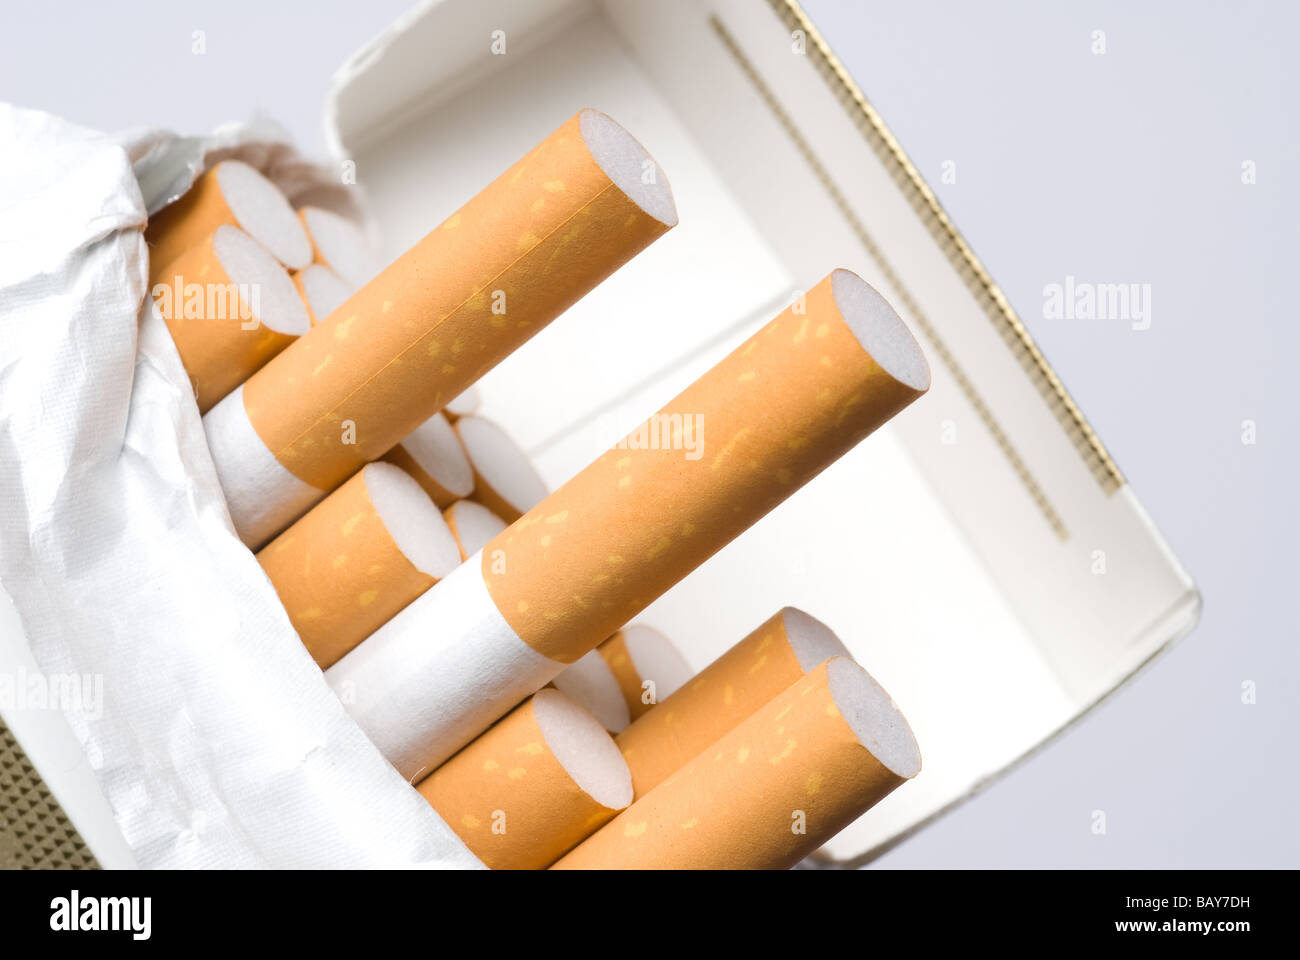 A pack of cigarettes showing the filter end of the smoke Stock Photo